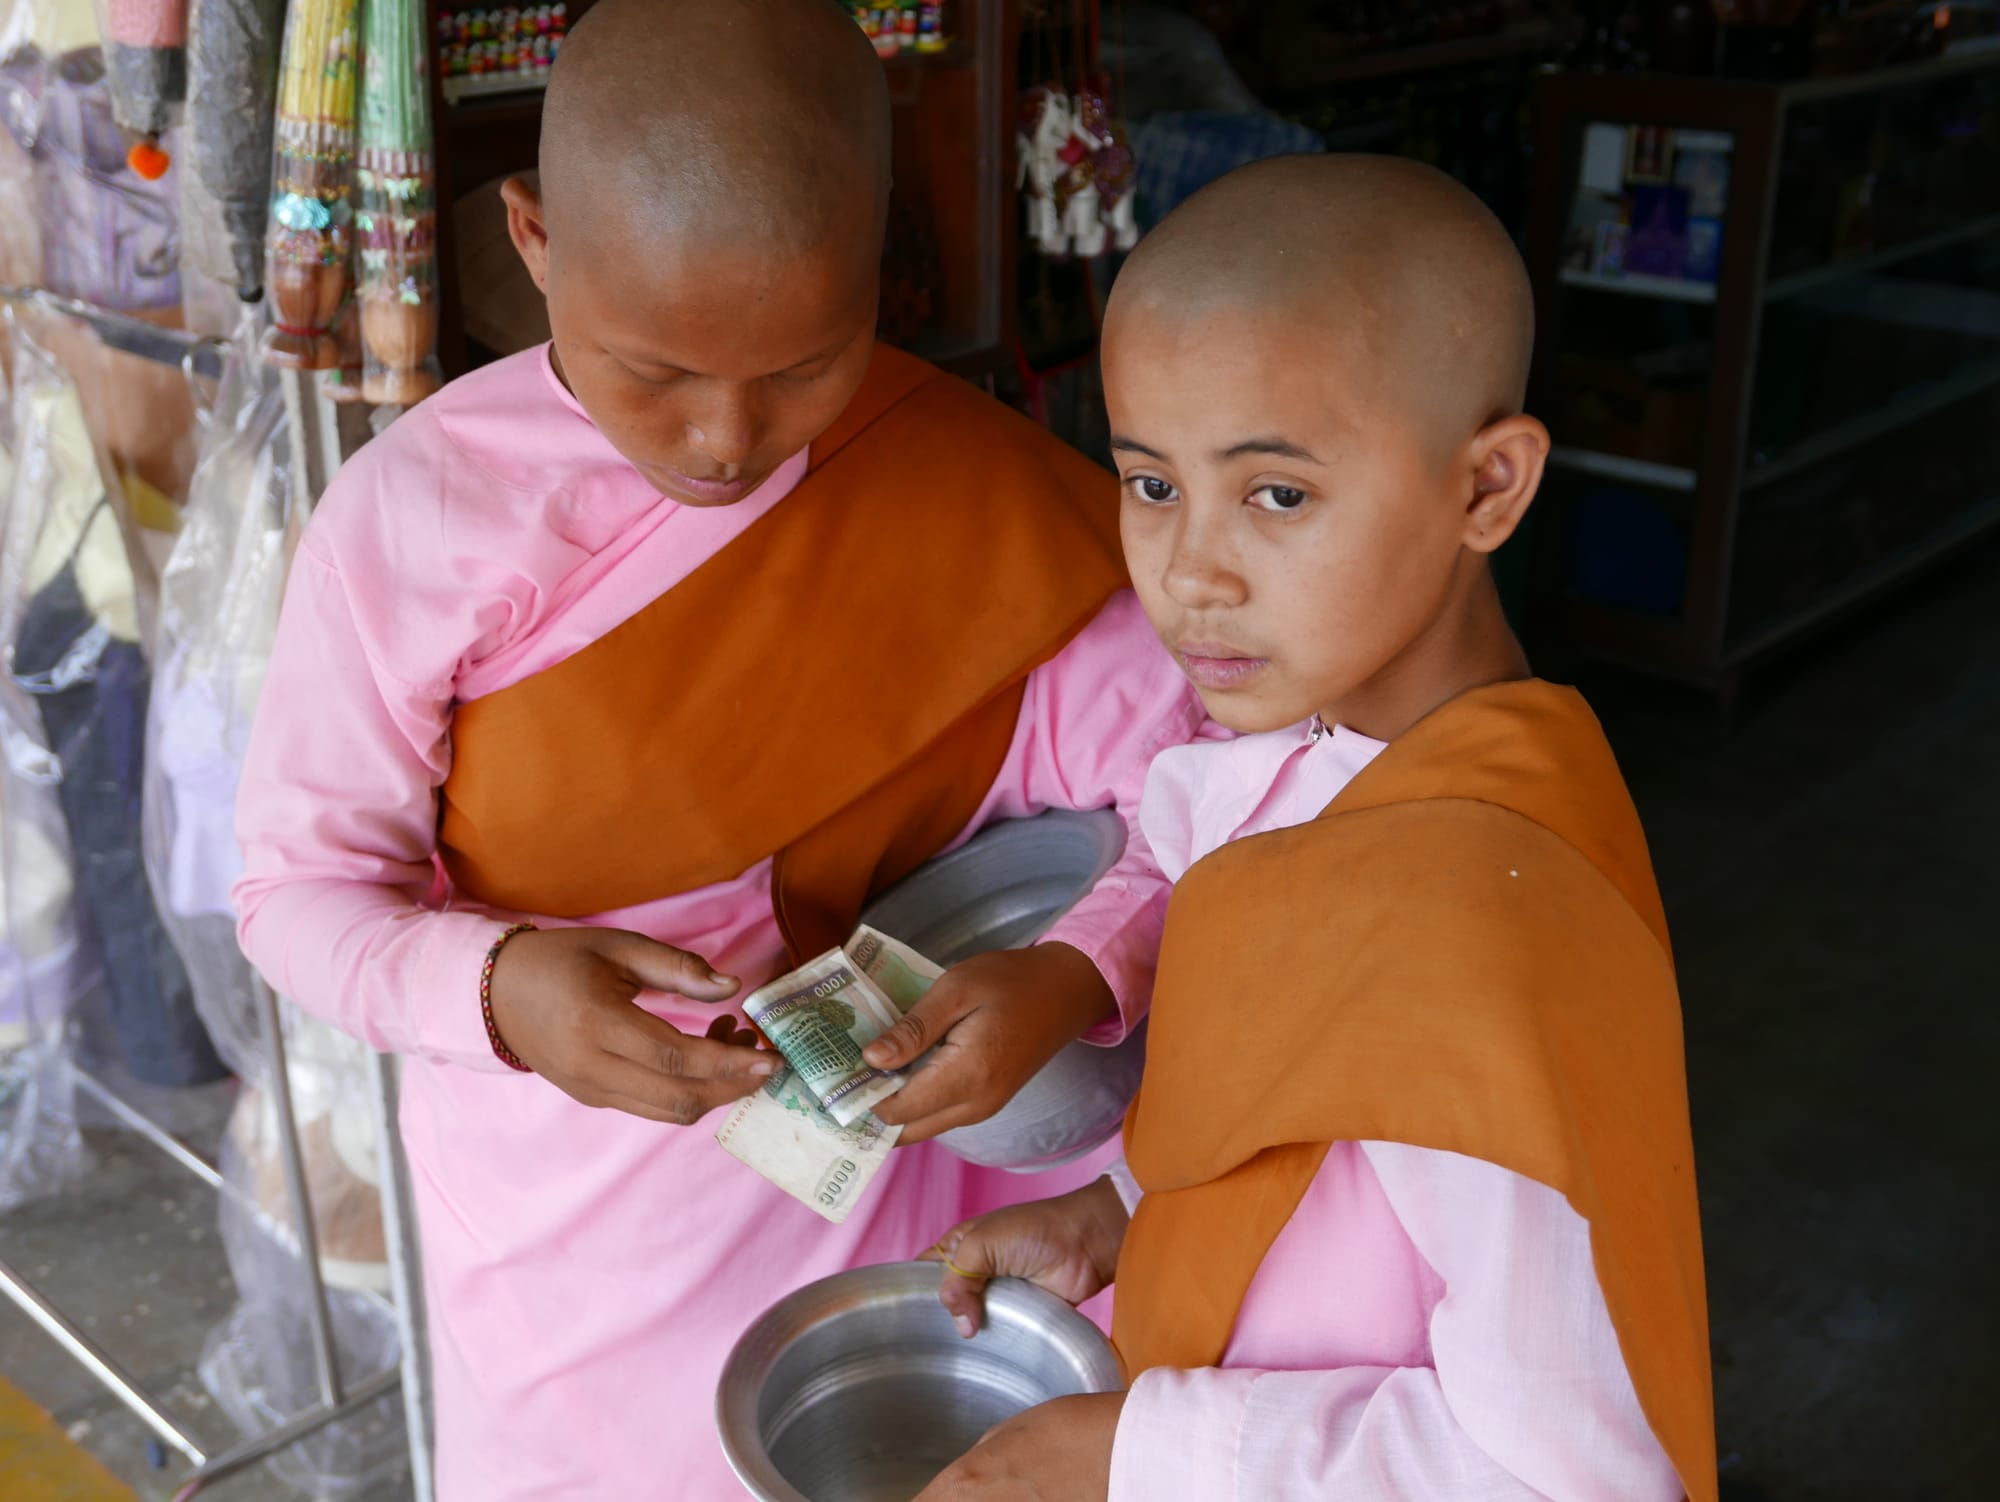 Photo by Author — “pink nuns” counting their donations